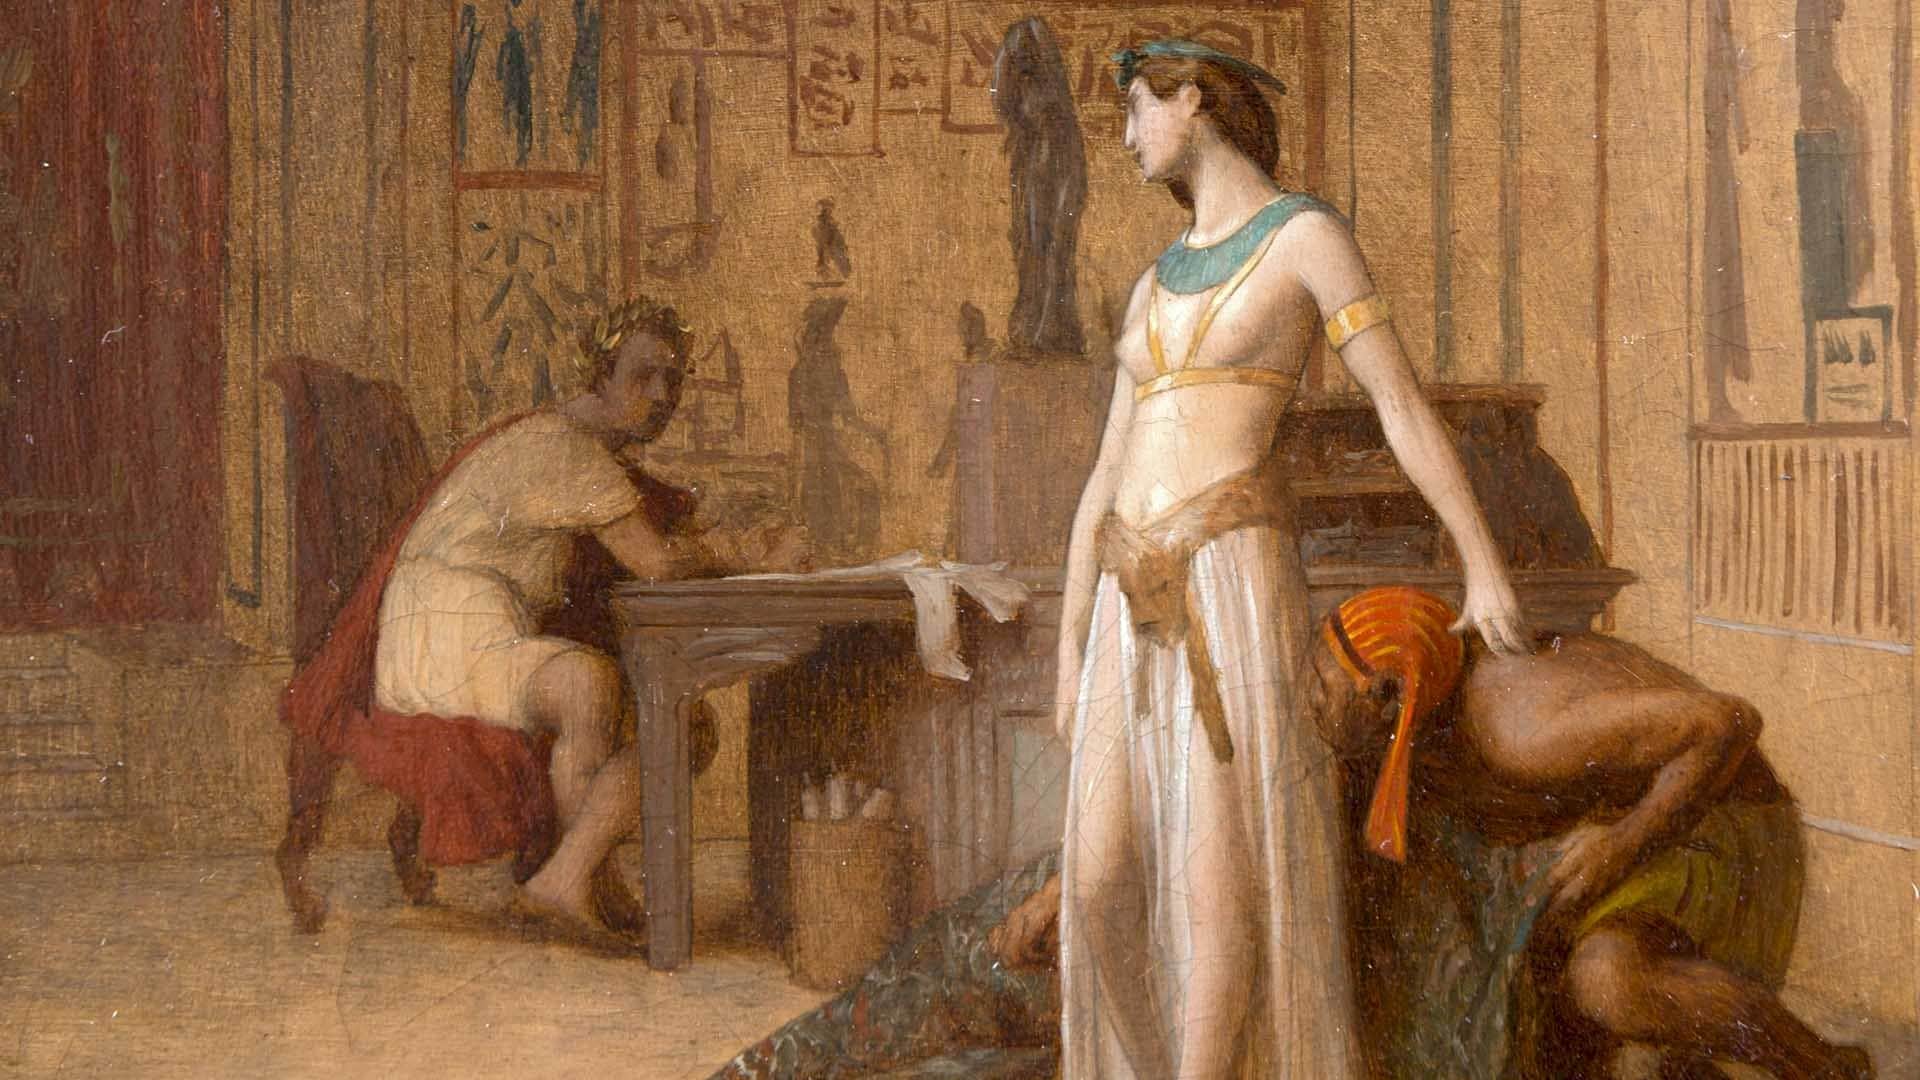 5 Interesting Facts About Cleopatra You Probably Didn’t Know